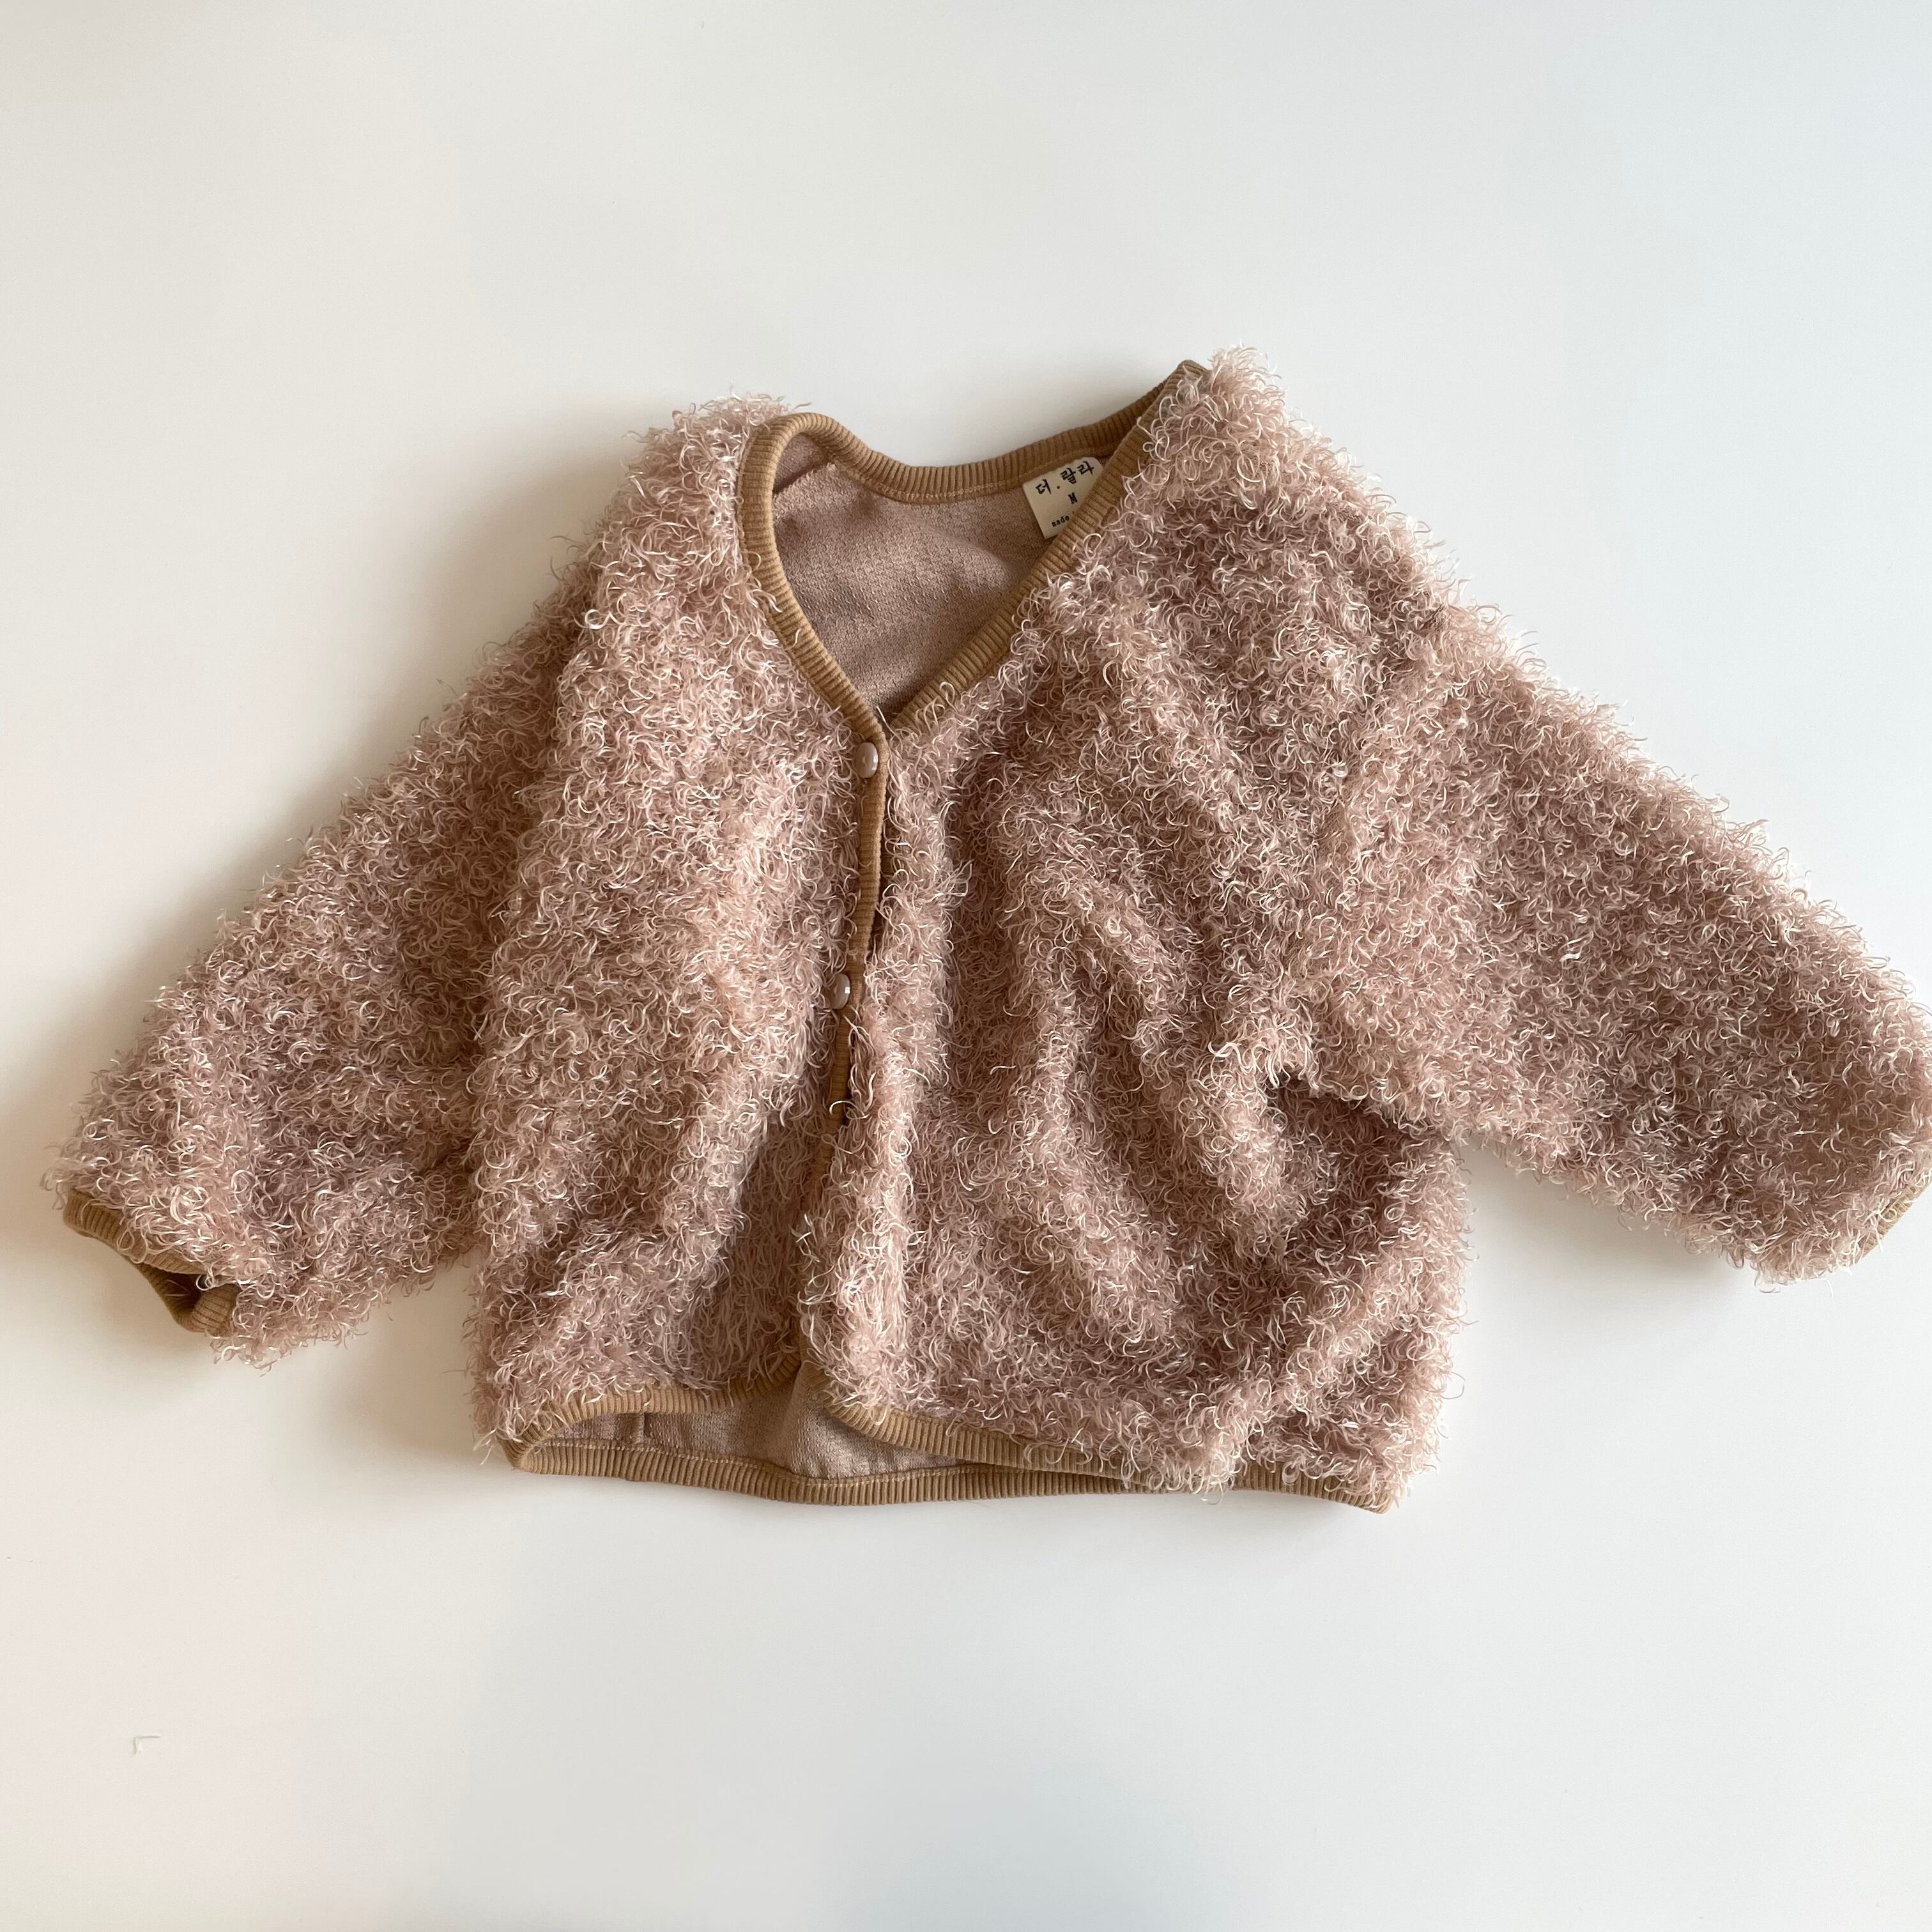 【 NO.663 】poodle cardigan / the lala